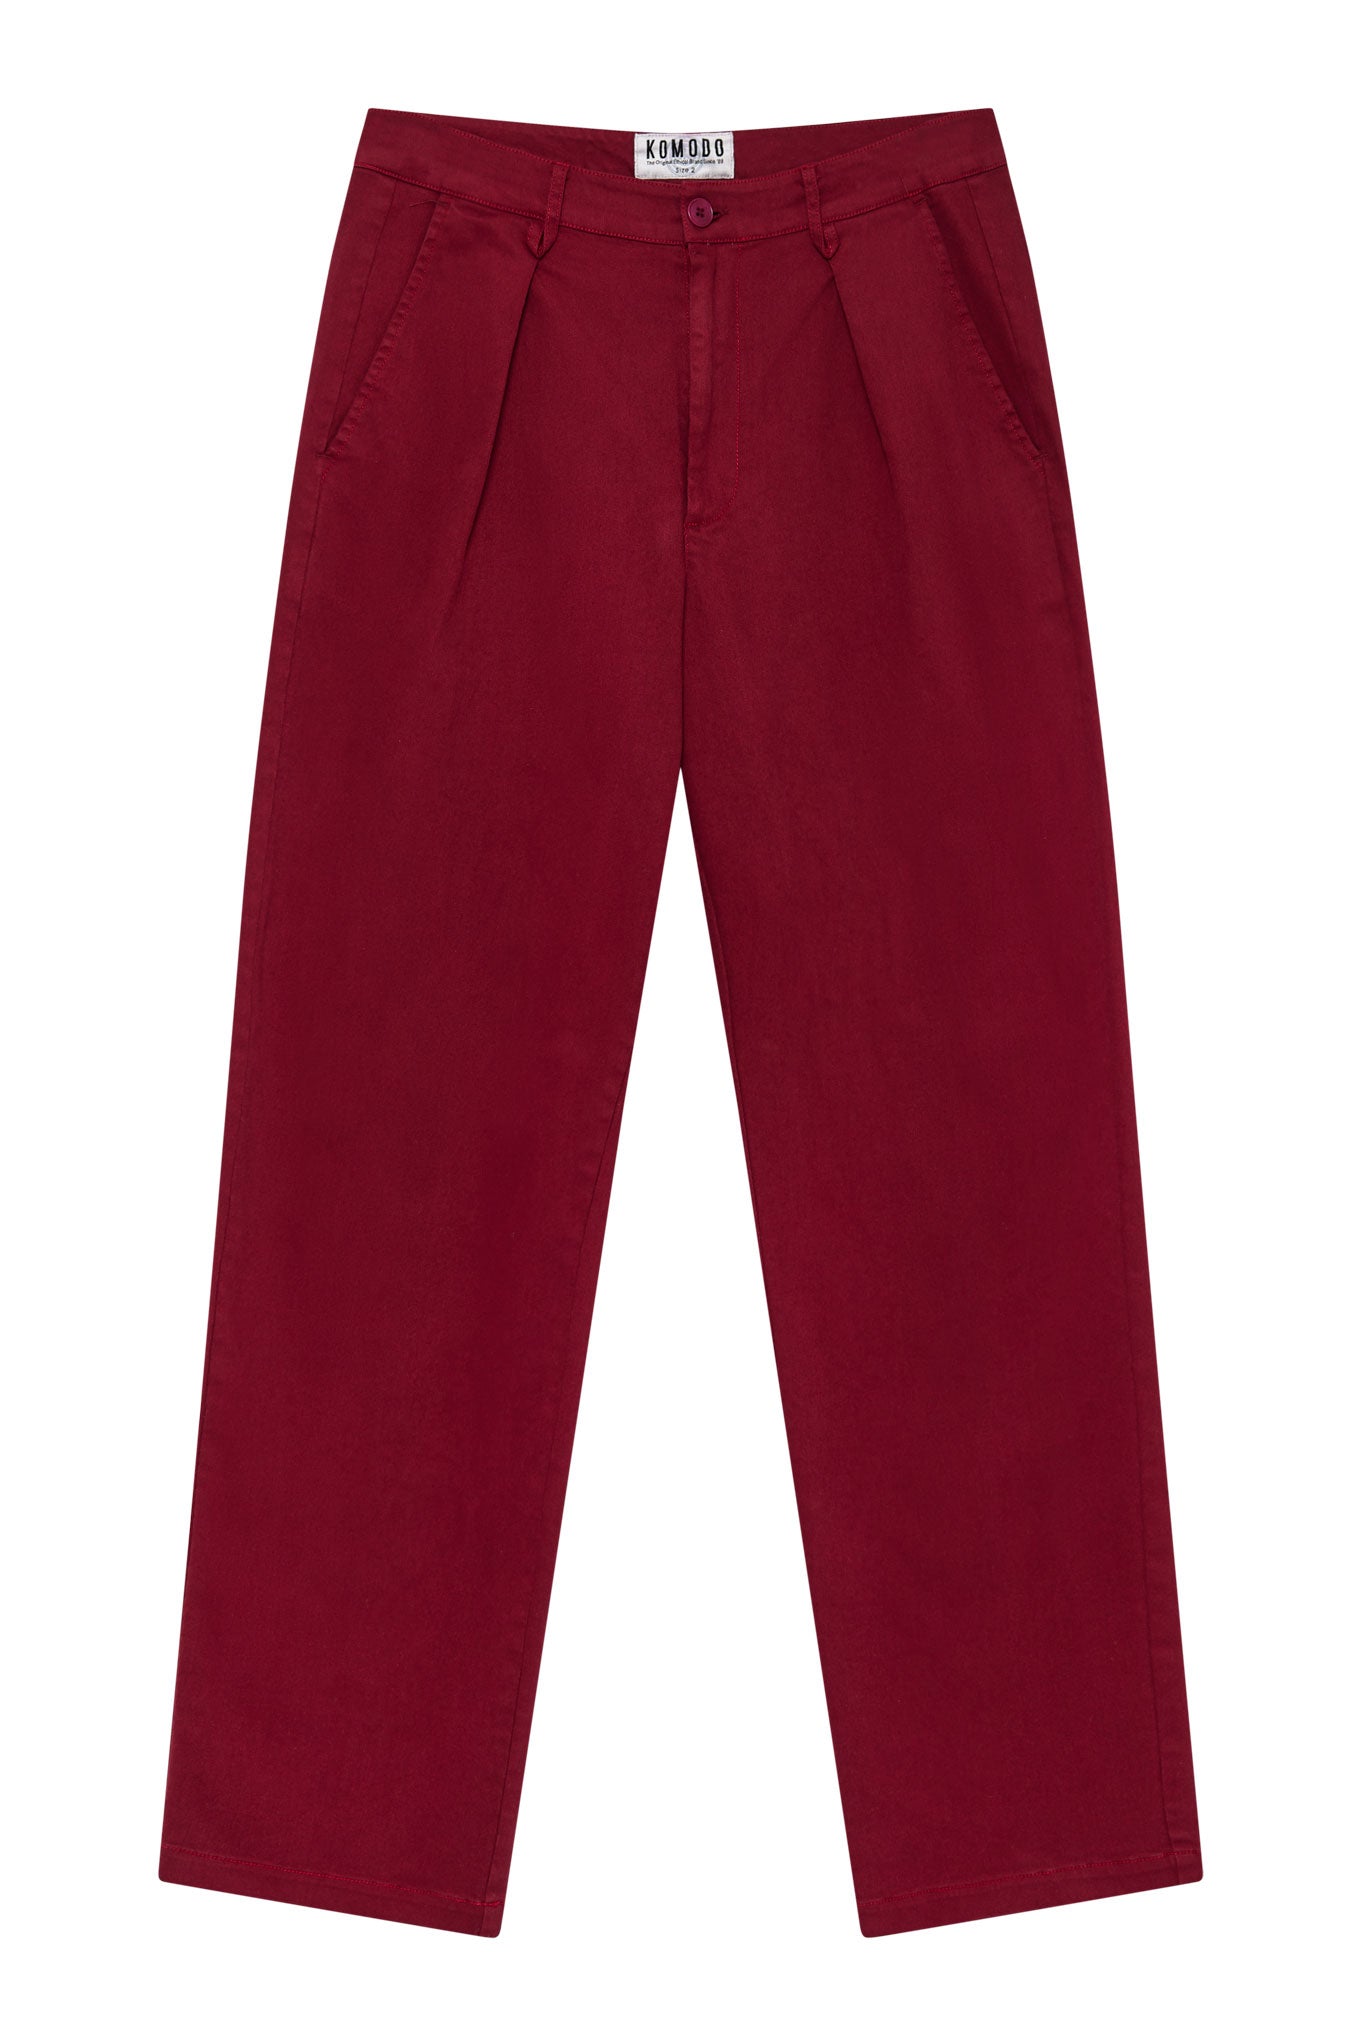 Komodo Men's Bowie - Loose Fit Organic Cotton Twill Trouser Wine Red